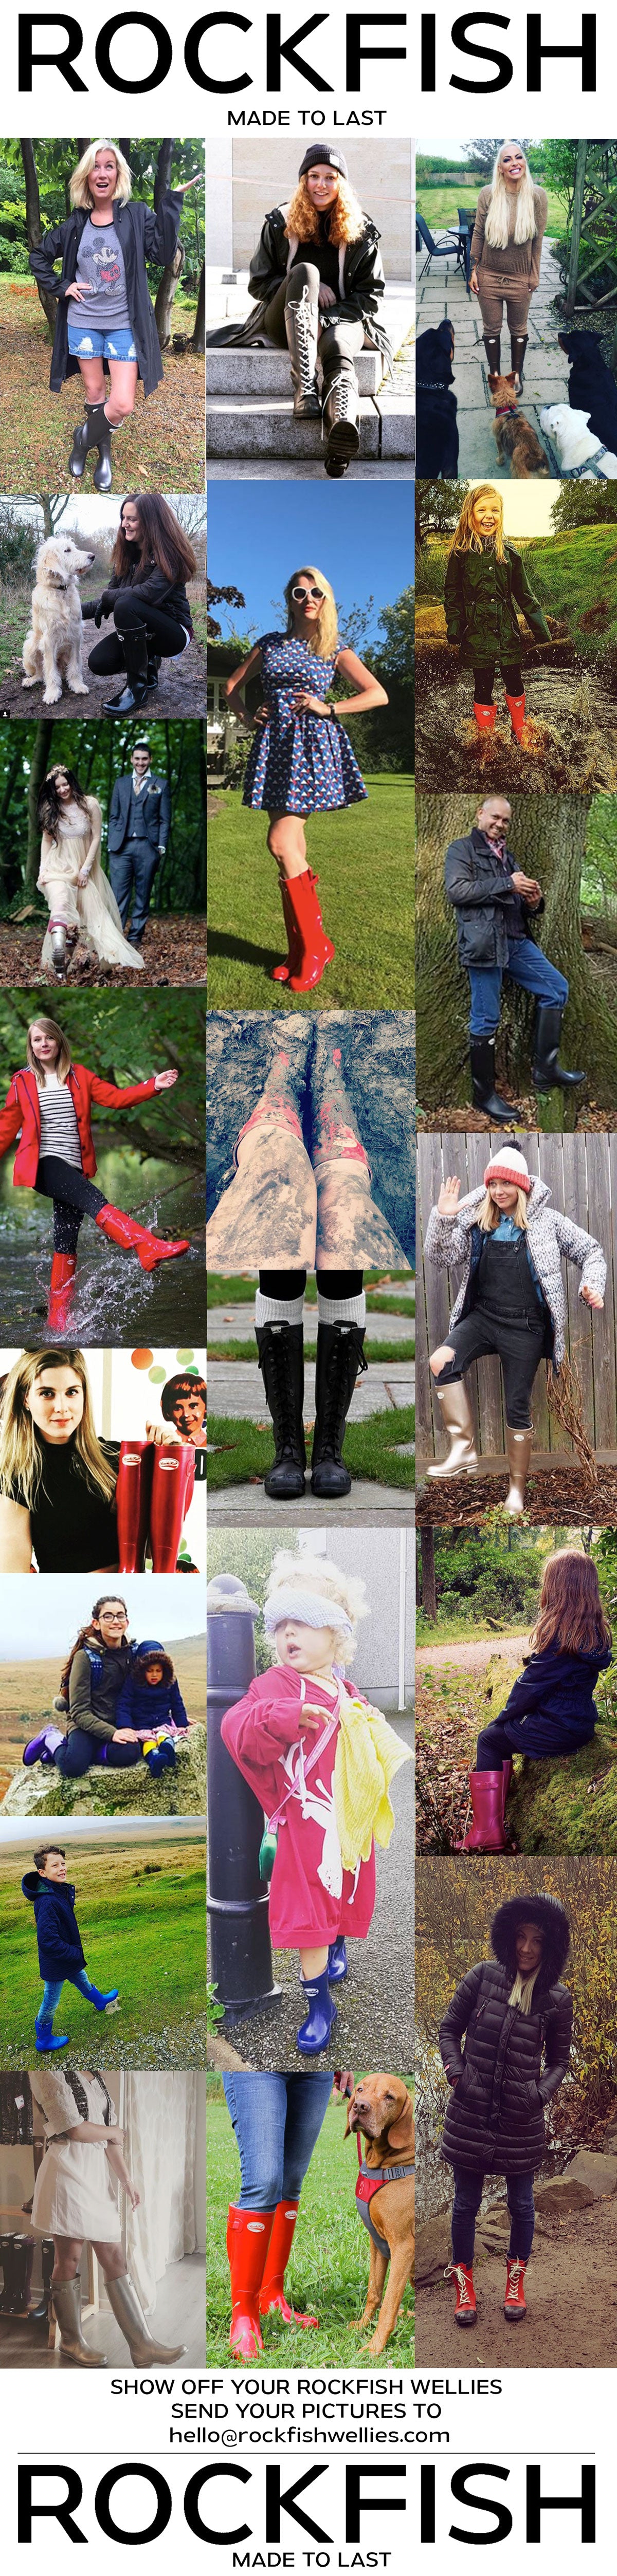 Rockfish Welly wearers, featured here on our very own blog.